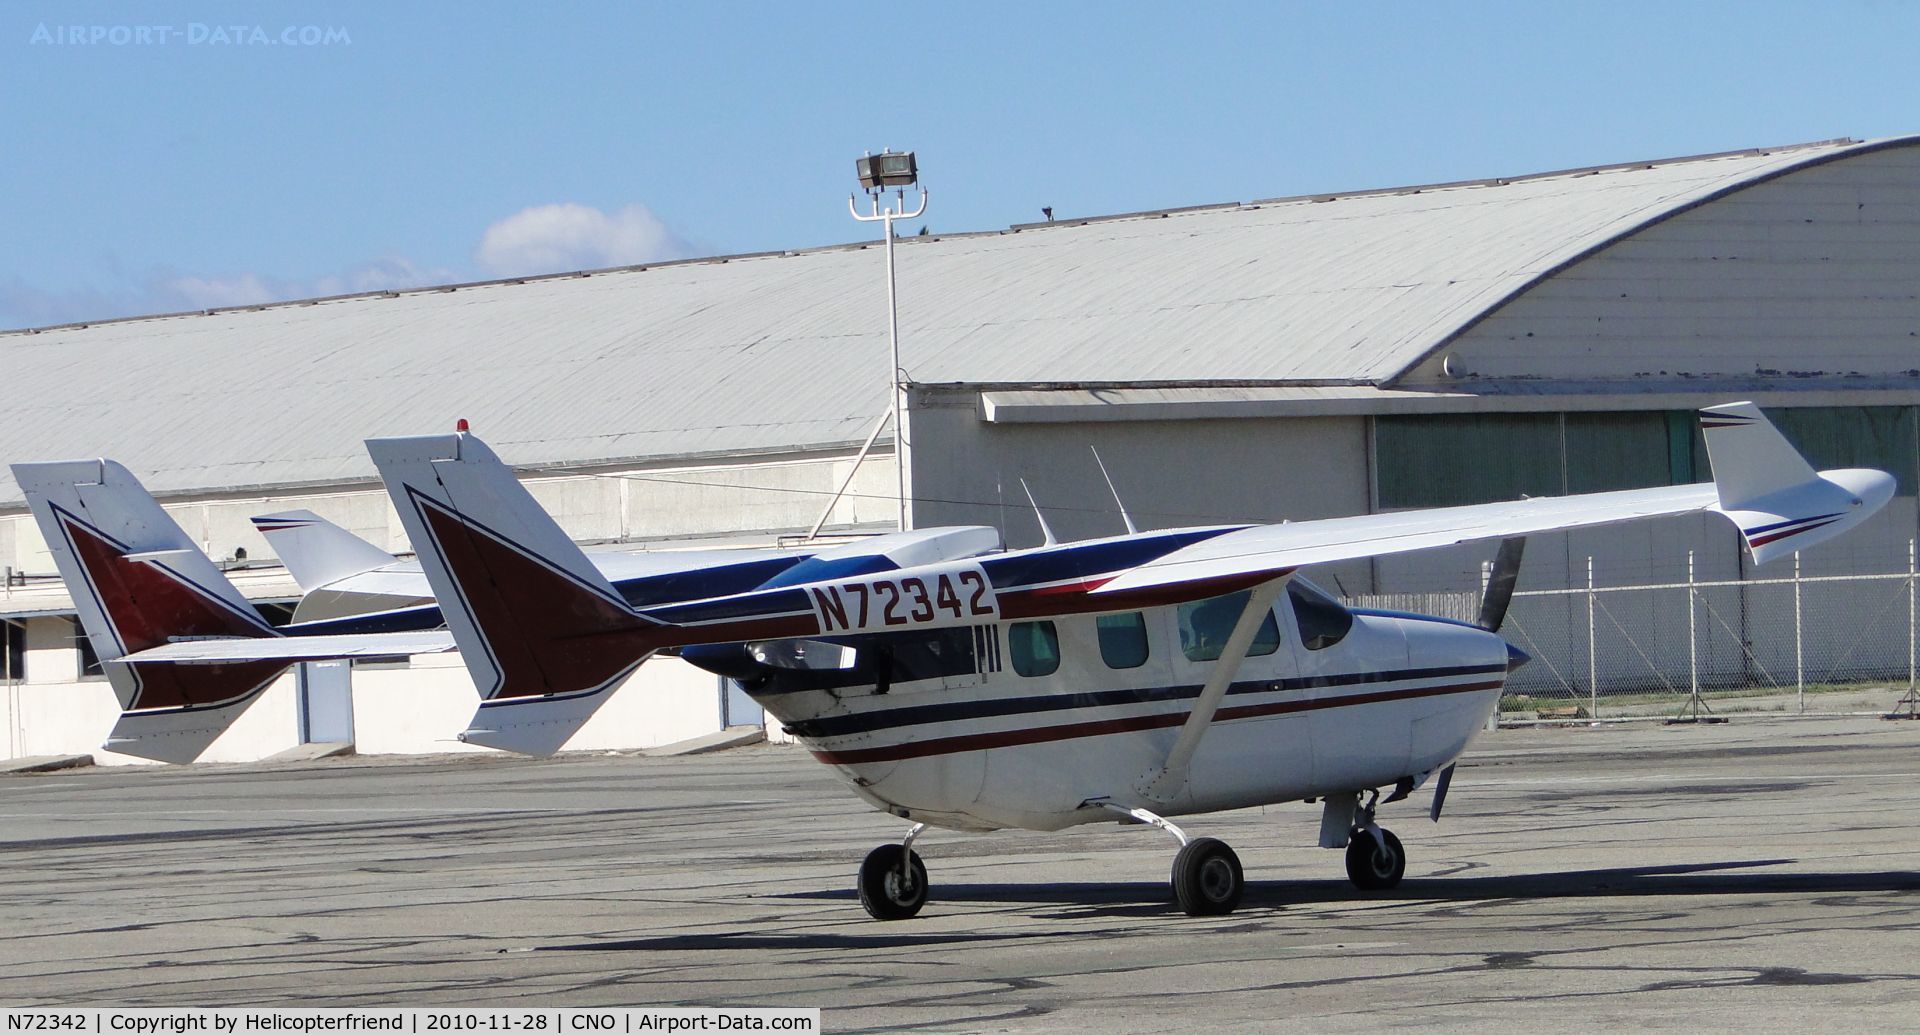 N72342, 1973 Cessna 337G Super Skymaster C/N 33701567, Just taxied in and parked